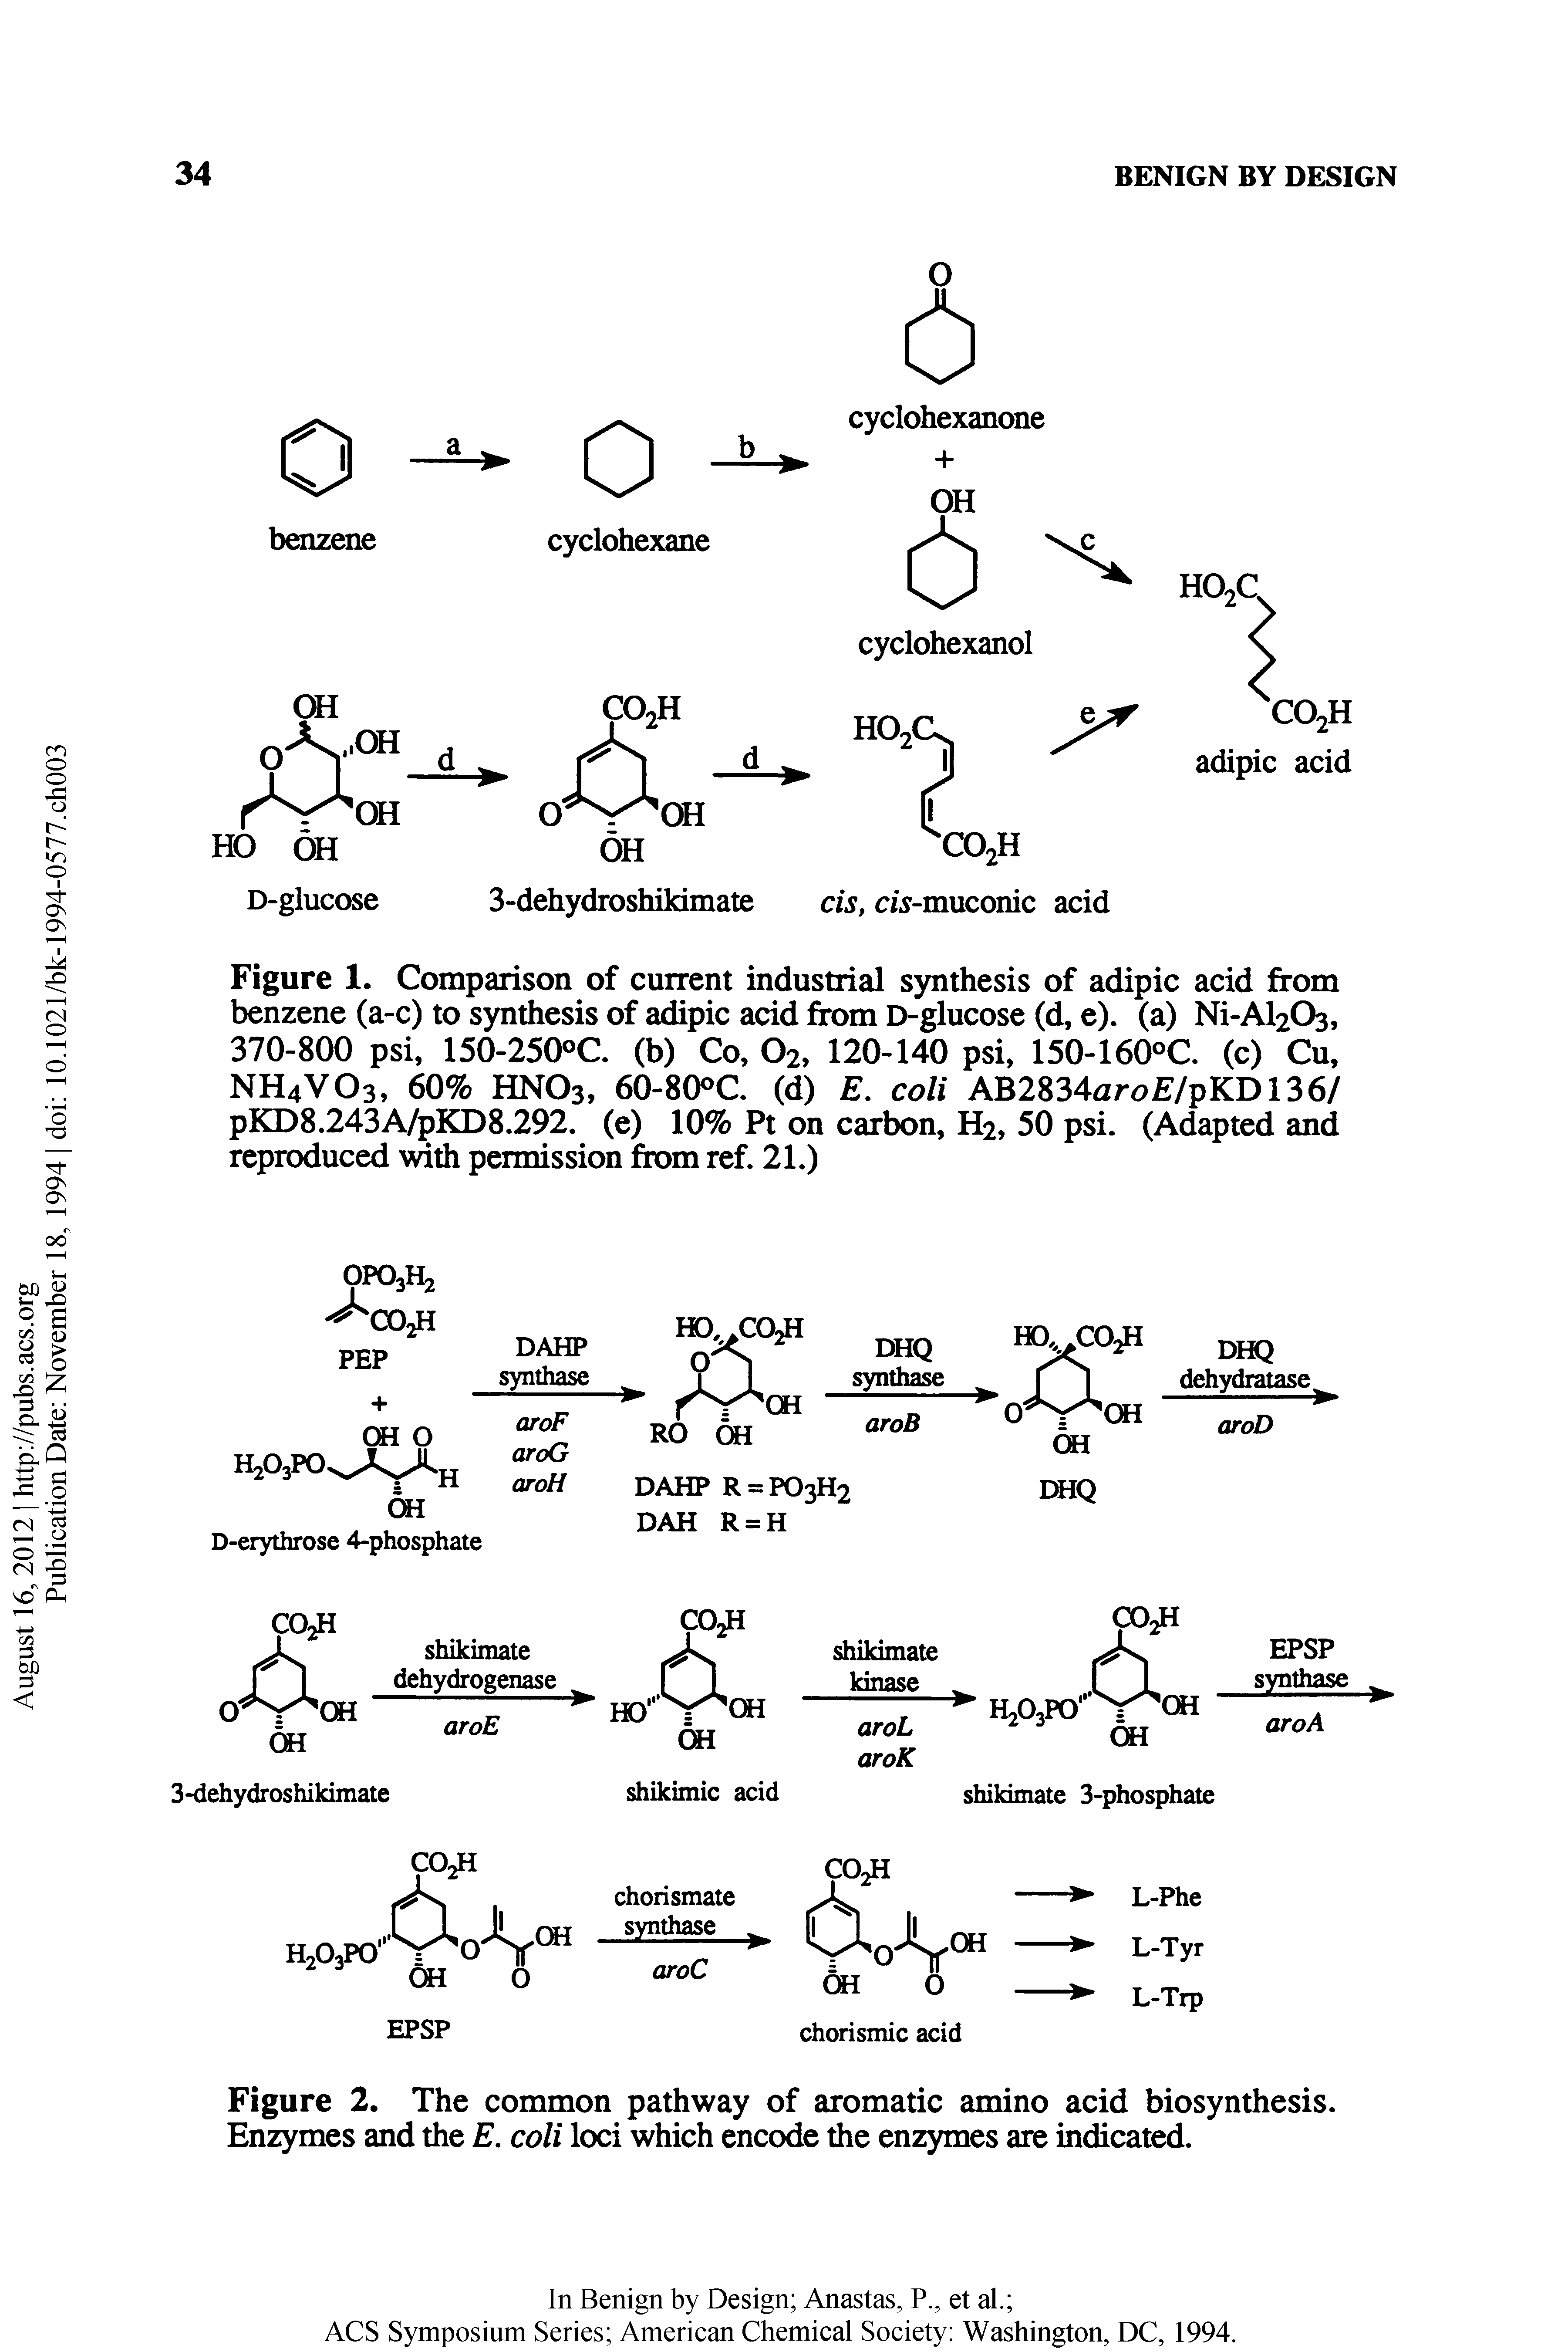 Figure 1. Comparison of current industrial synthesis of adipic acid from benzene (a-c) to syndiesis of adipic acid from D-glucose (d, e). (a) Ni-Al203, 370-800 psi, 150-250°C (b) Co, O2, 120-140 psi, 150-160°C. (c) Cu, NH4VO3, 60% HNO3, 60-80OQ (d) E. coli AB2834 iro /pKD136/ pKD8.243A/pKD8.292. (e) 10% Pt on carbon, H2, 50 psi. (Adapted and reproduced with permission from ref. 21.)...